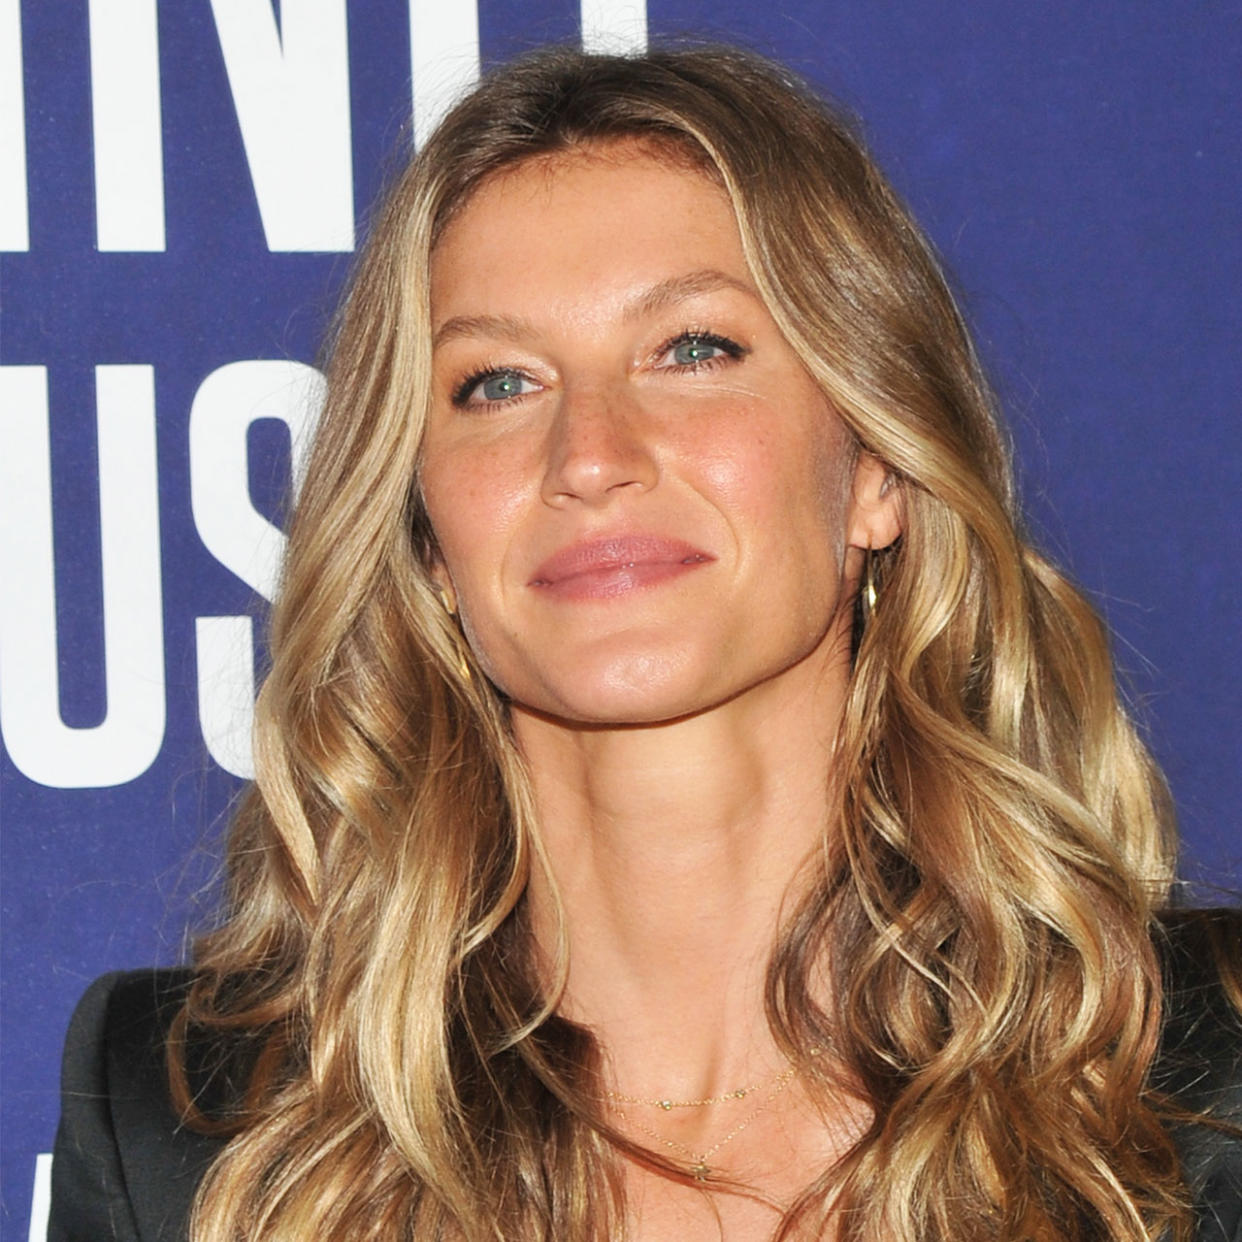 Gisele Bundchen National Geographic Years of Living Dangerously premiere